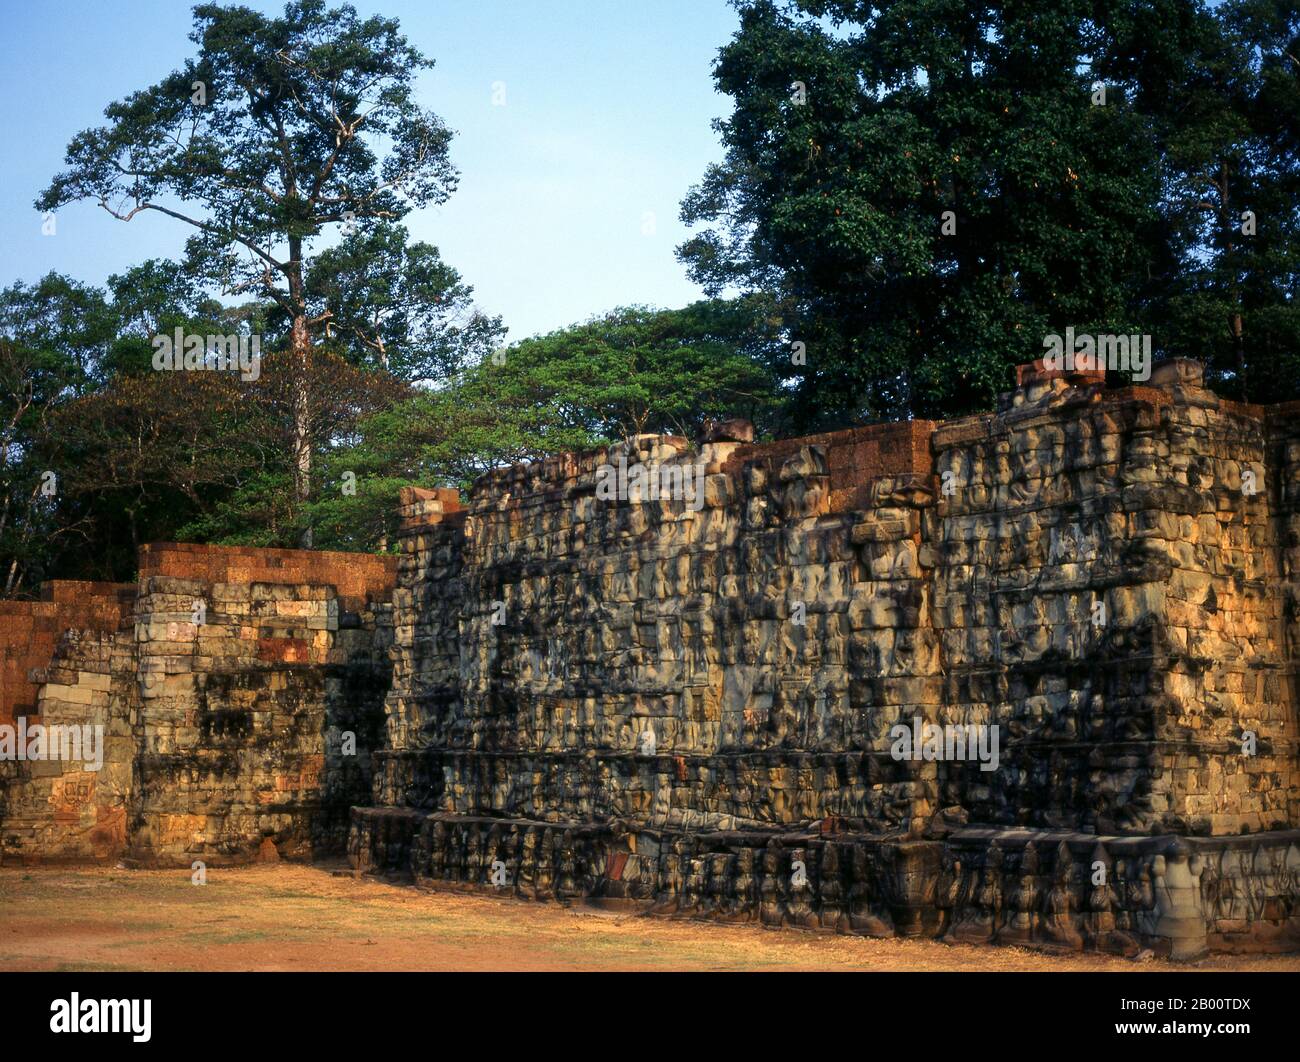 Cambodia: The Terrace of the Leper King, Angkor Thom.  The Terrace of the Leper King was built during the reign of King Jayavarman VII.  Angkor Thom, meaning ‘The Great City’, is located one mile north of Angkor Wat. It was built in the late 12th century by King Jayavarman VII, and covers an area of 9 km², within which are located several monuments from earlier eras as well as those established by Jayavarman and his successors. It is believed to have sustained a population of 80,000-150,000 people. Stock Photo